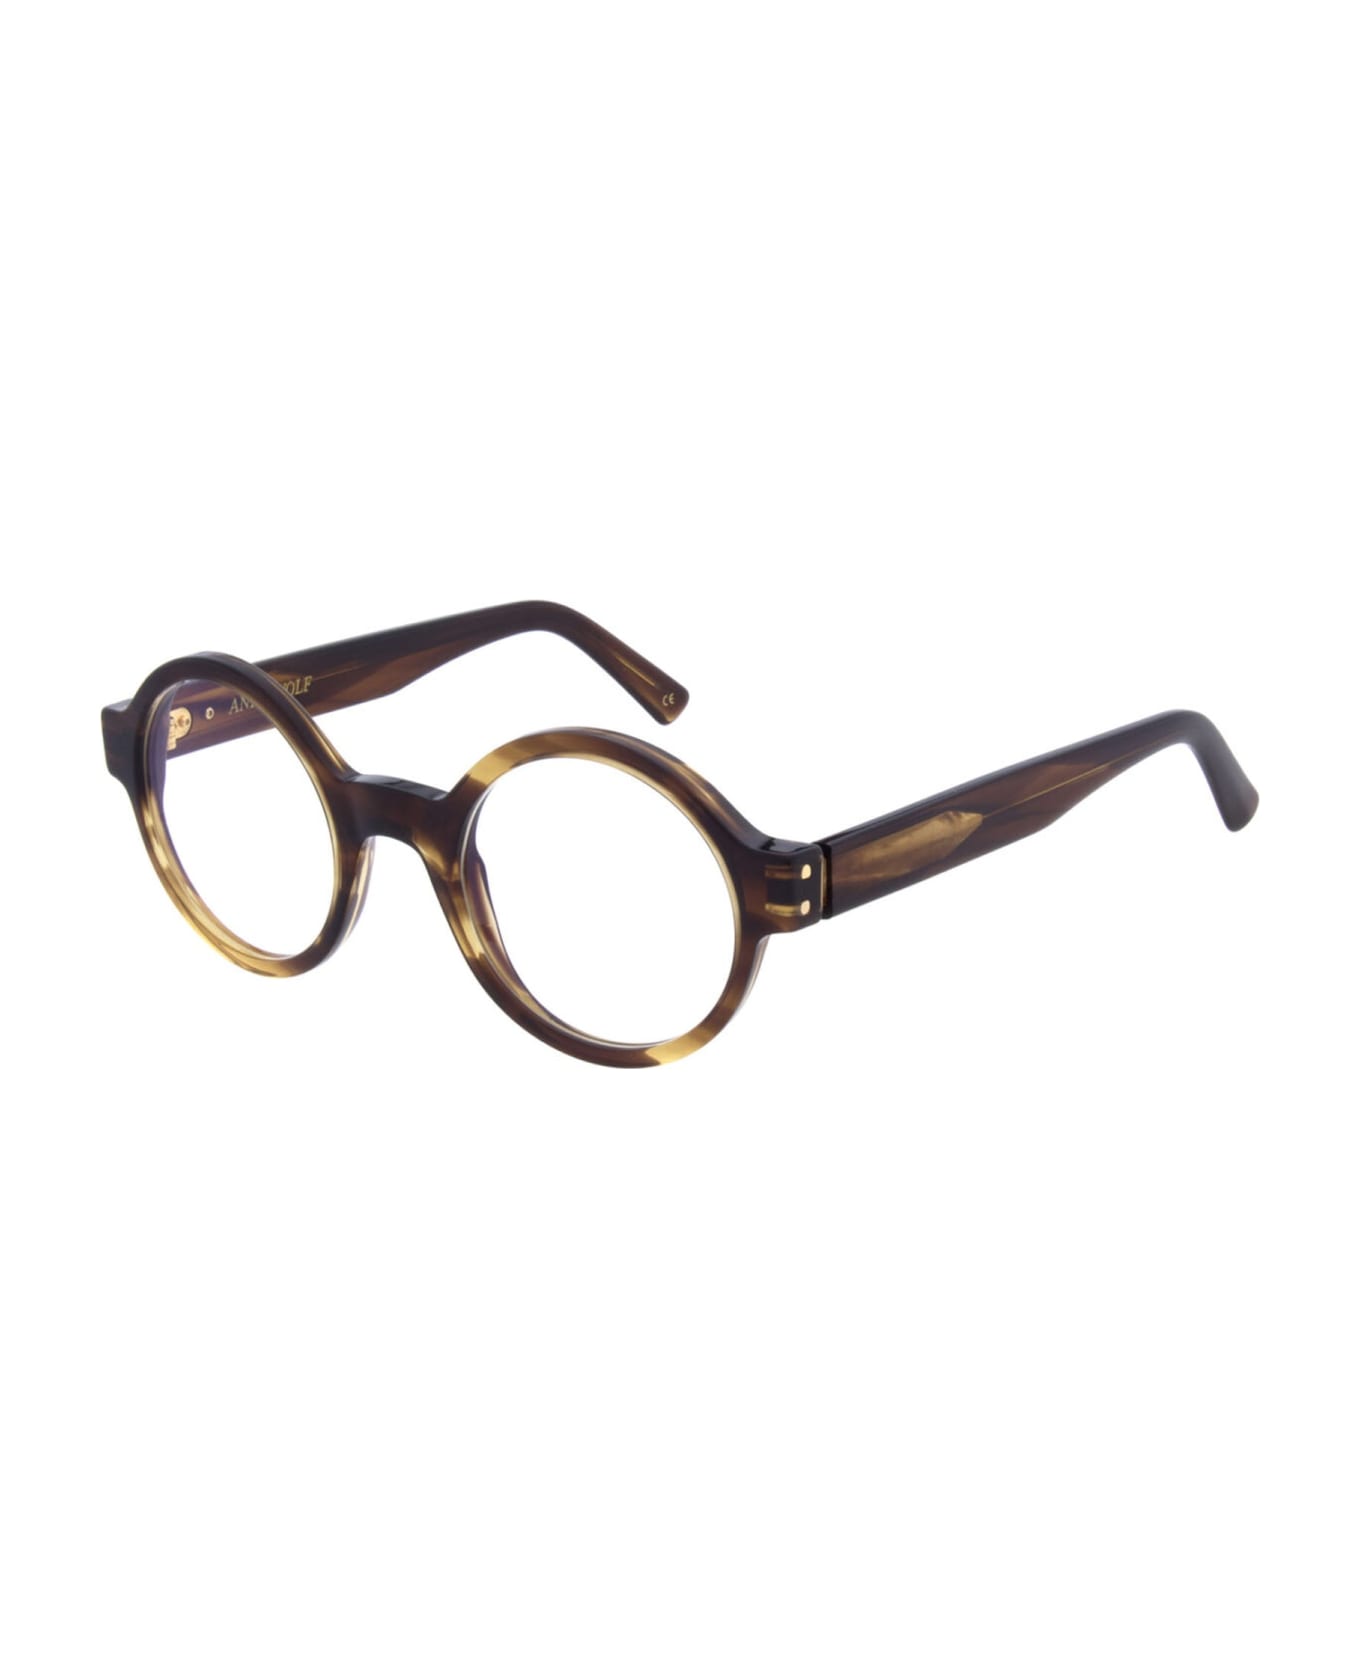 Andy Wolf Aw02 - Brown / Gold Glasses - brown